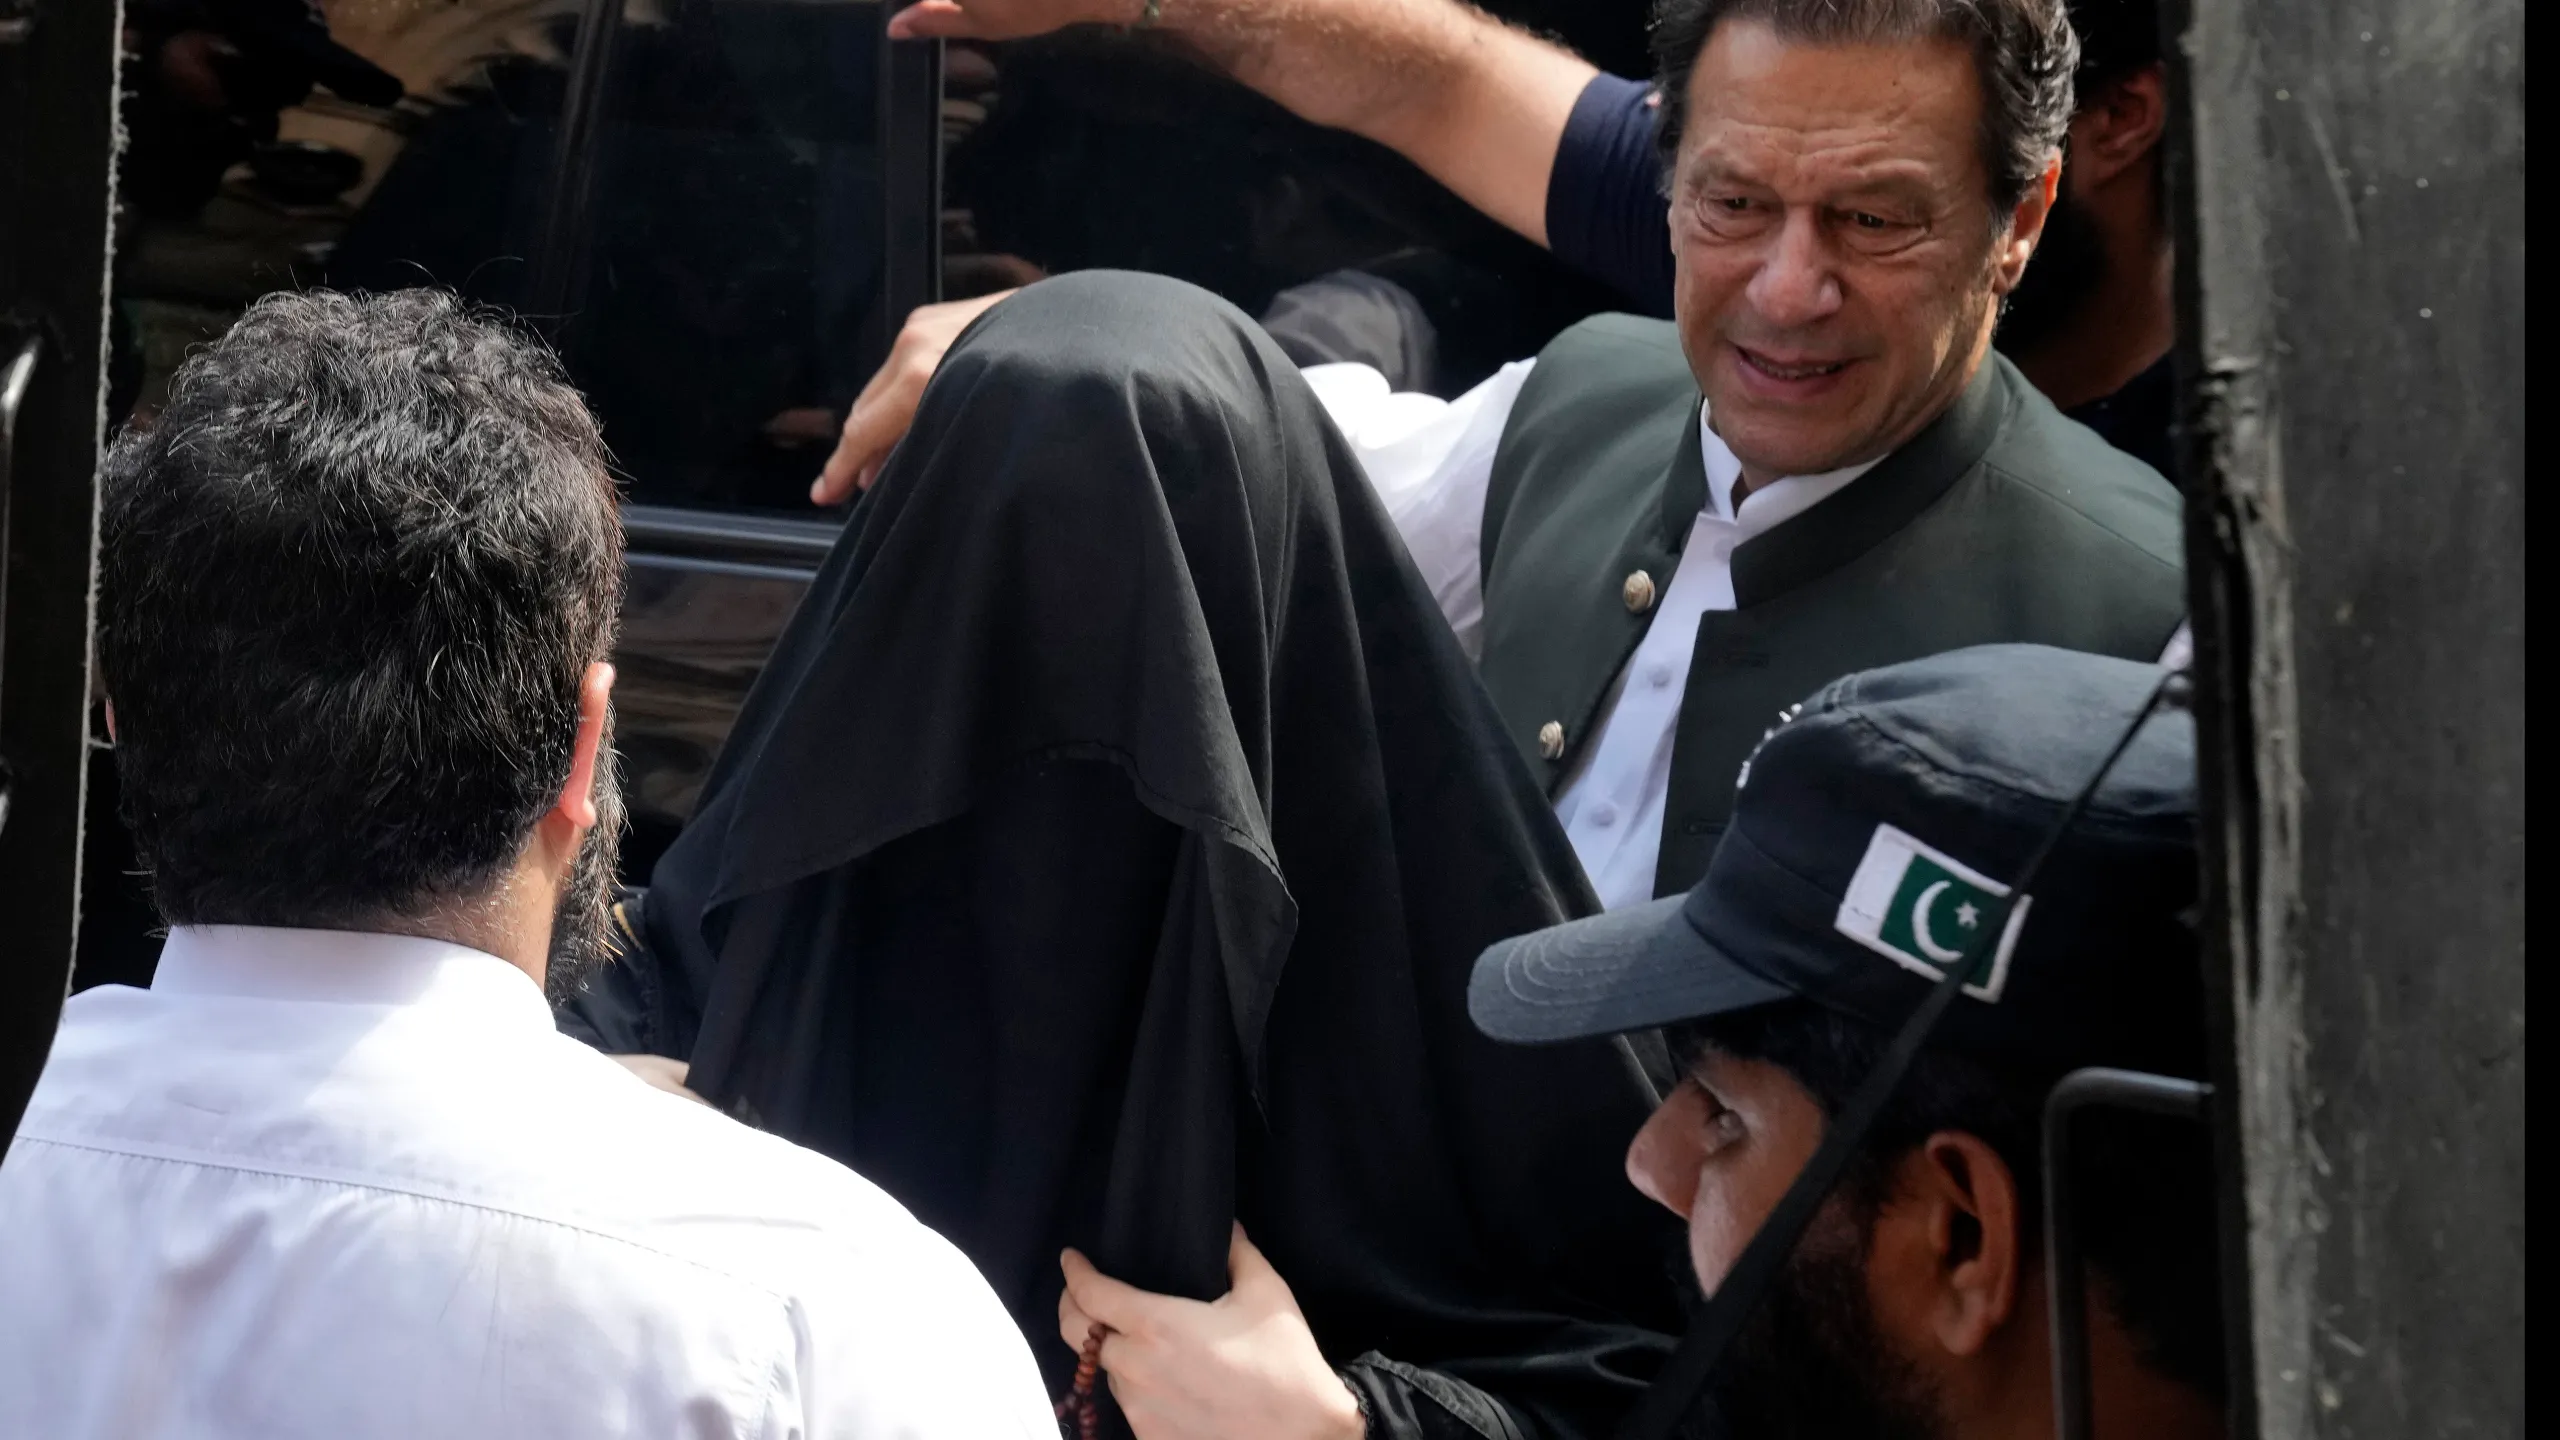 Pakistani Court Hands Down 10-Year Sentence to Ex-Prime Minister Imran Khan for Disclosing Confidential Information